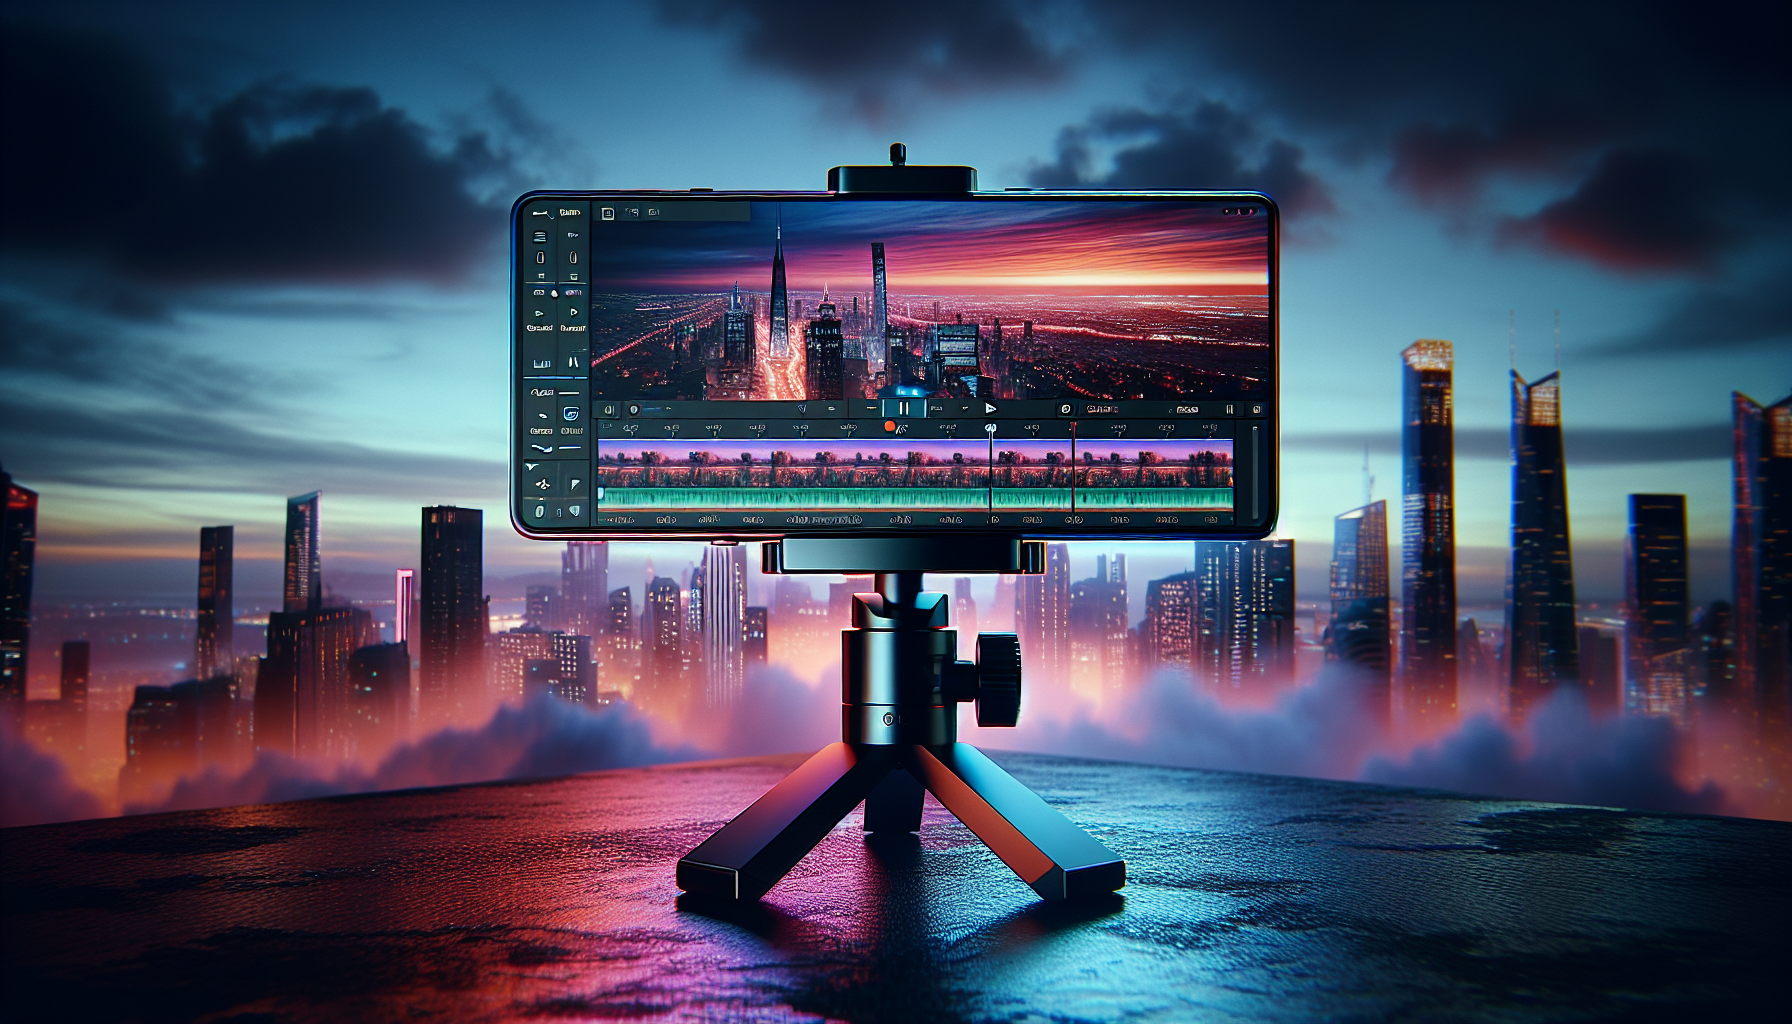 A sleek, high-tech Atomos Ninja Phone mounted on a tripod, demonstrating its powerful video editing software with a breathtaking cinematic cityscape at dusk in the background, highlighting advanced fe